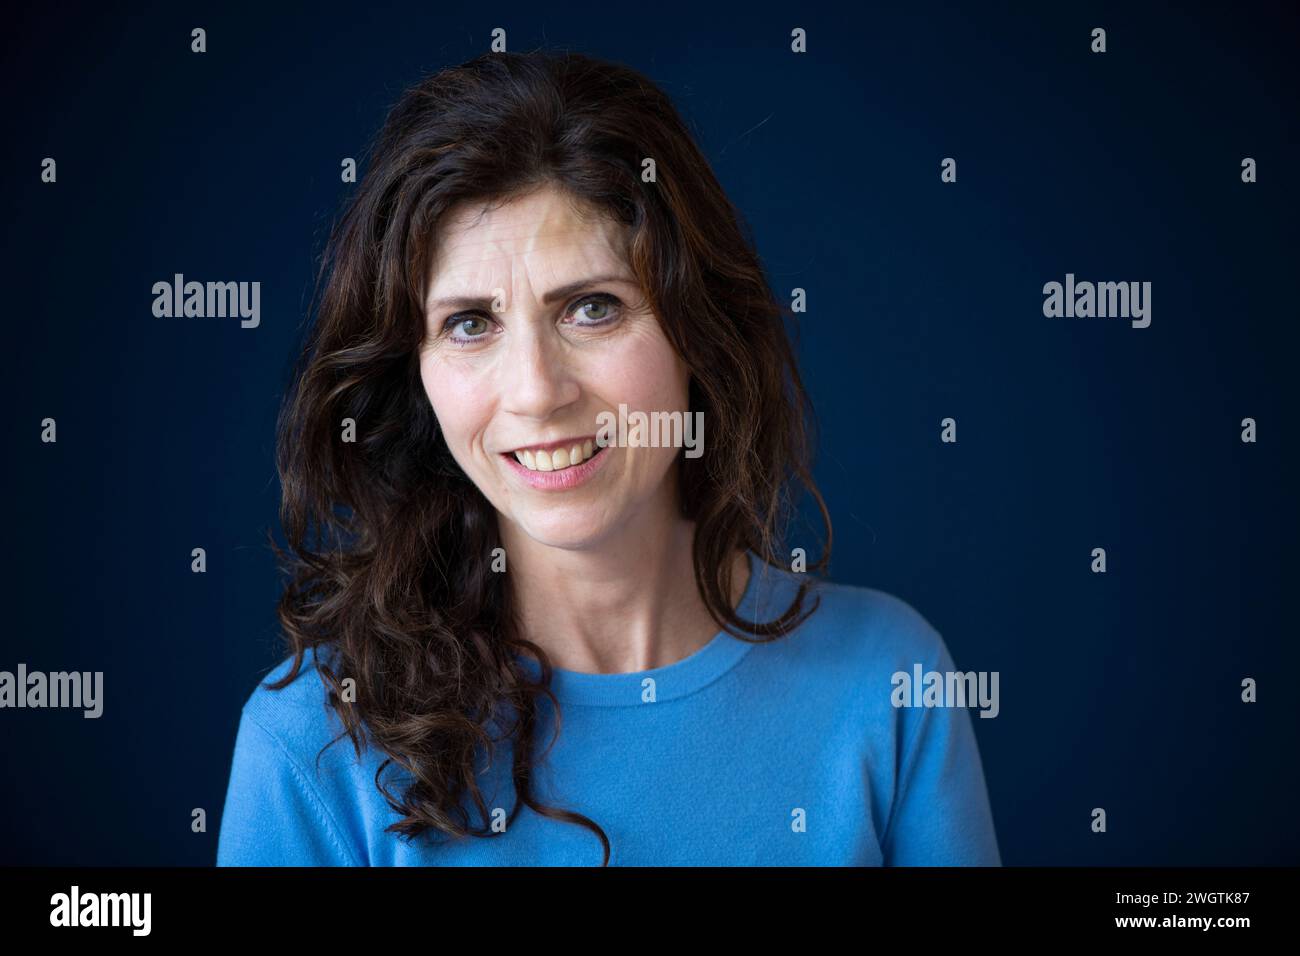 attractive woman looking into camera with an uncomfortable look on her face. Stock Photo